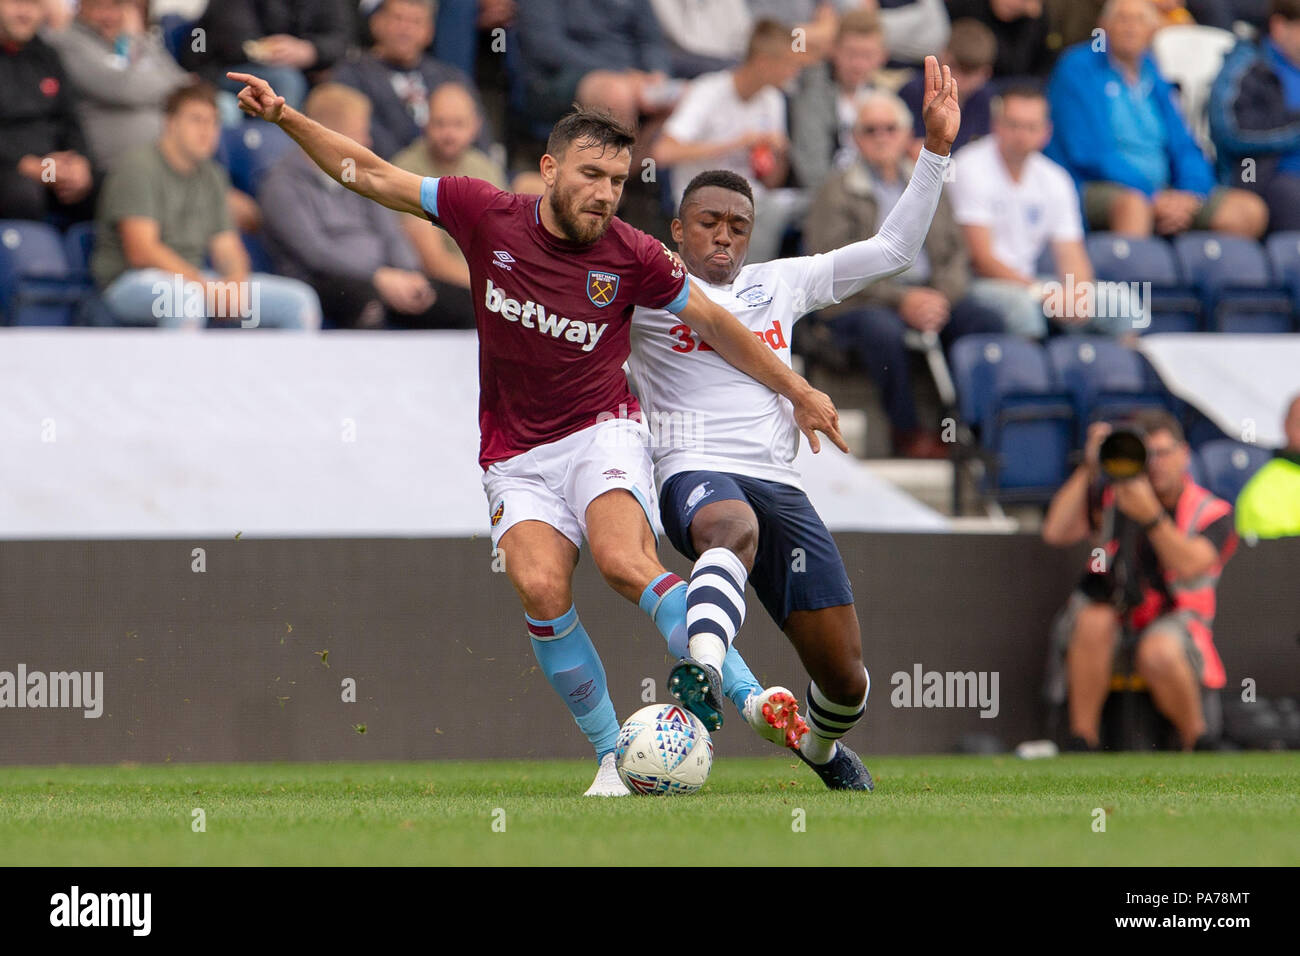 Deepdale, Preston, UK. 21st July, 2018. Pre season football friendly, Preston North End versus West Ham United; Robert Snodgrass of West Ham Utd is tackled as he tries to pass Credit: Action Plus Sports/Alamy Live News Stock Photo